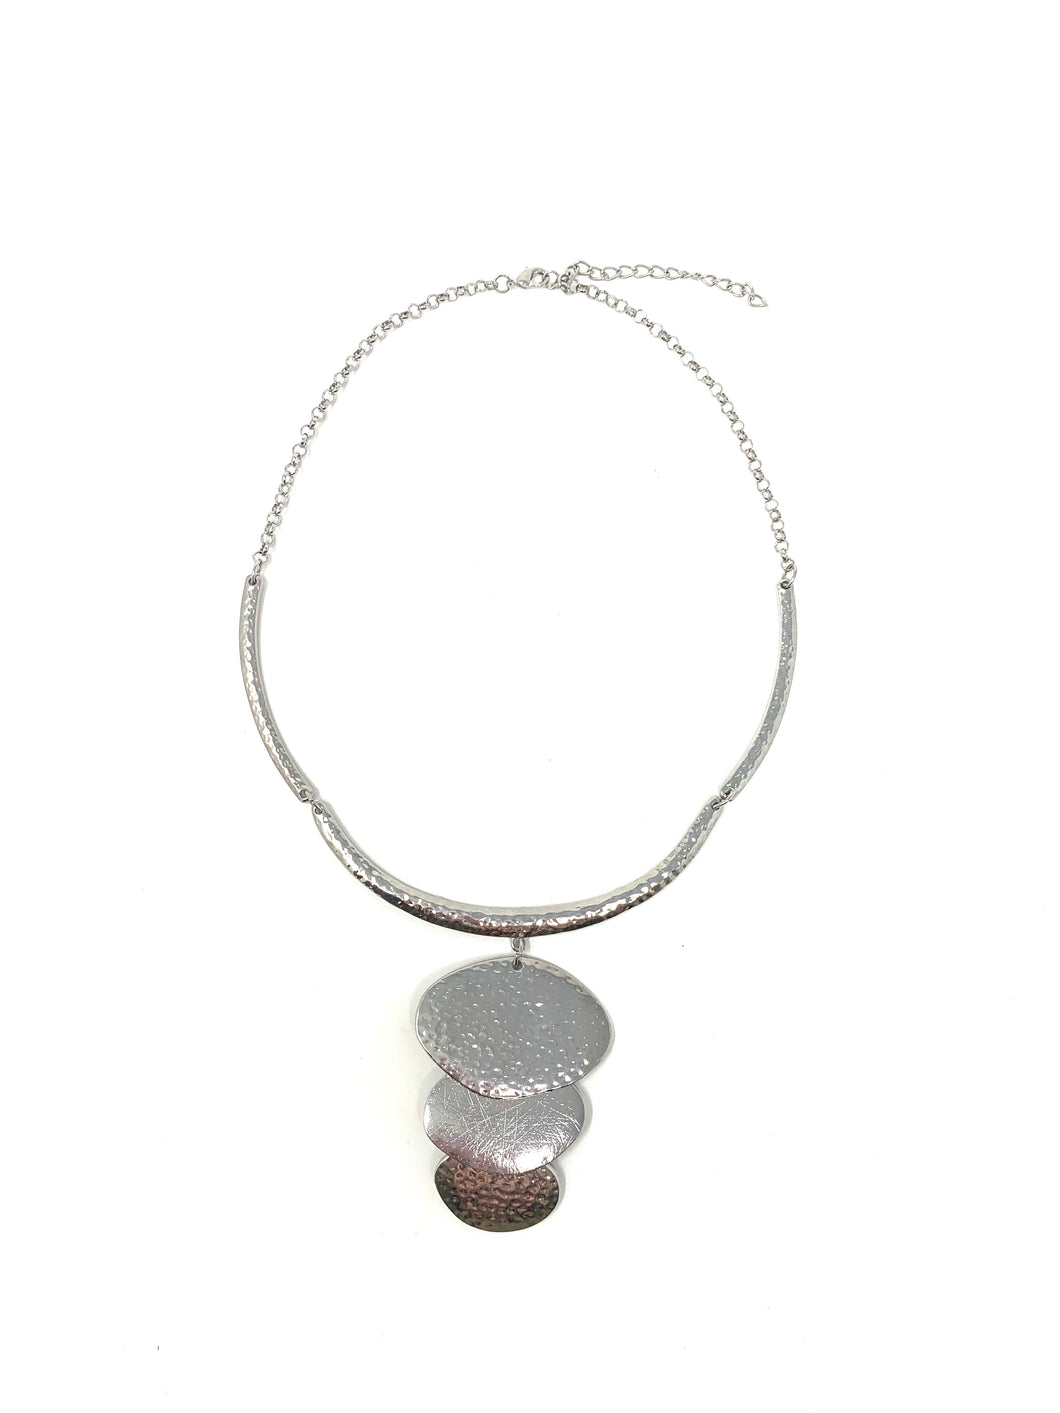 Hammered Silver Tone Abstract Necklace